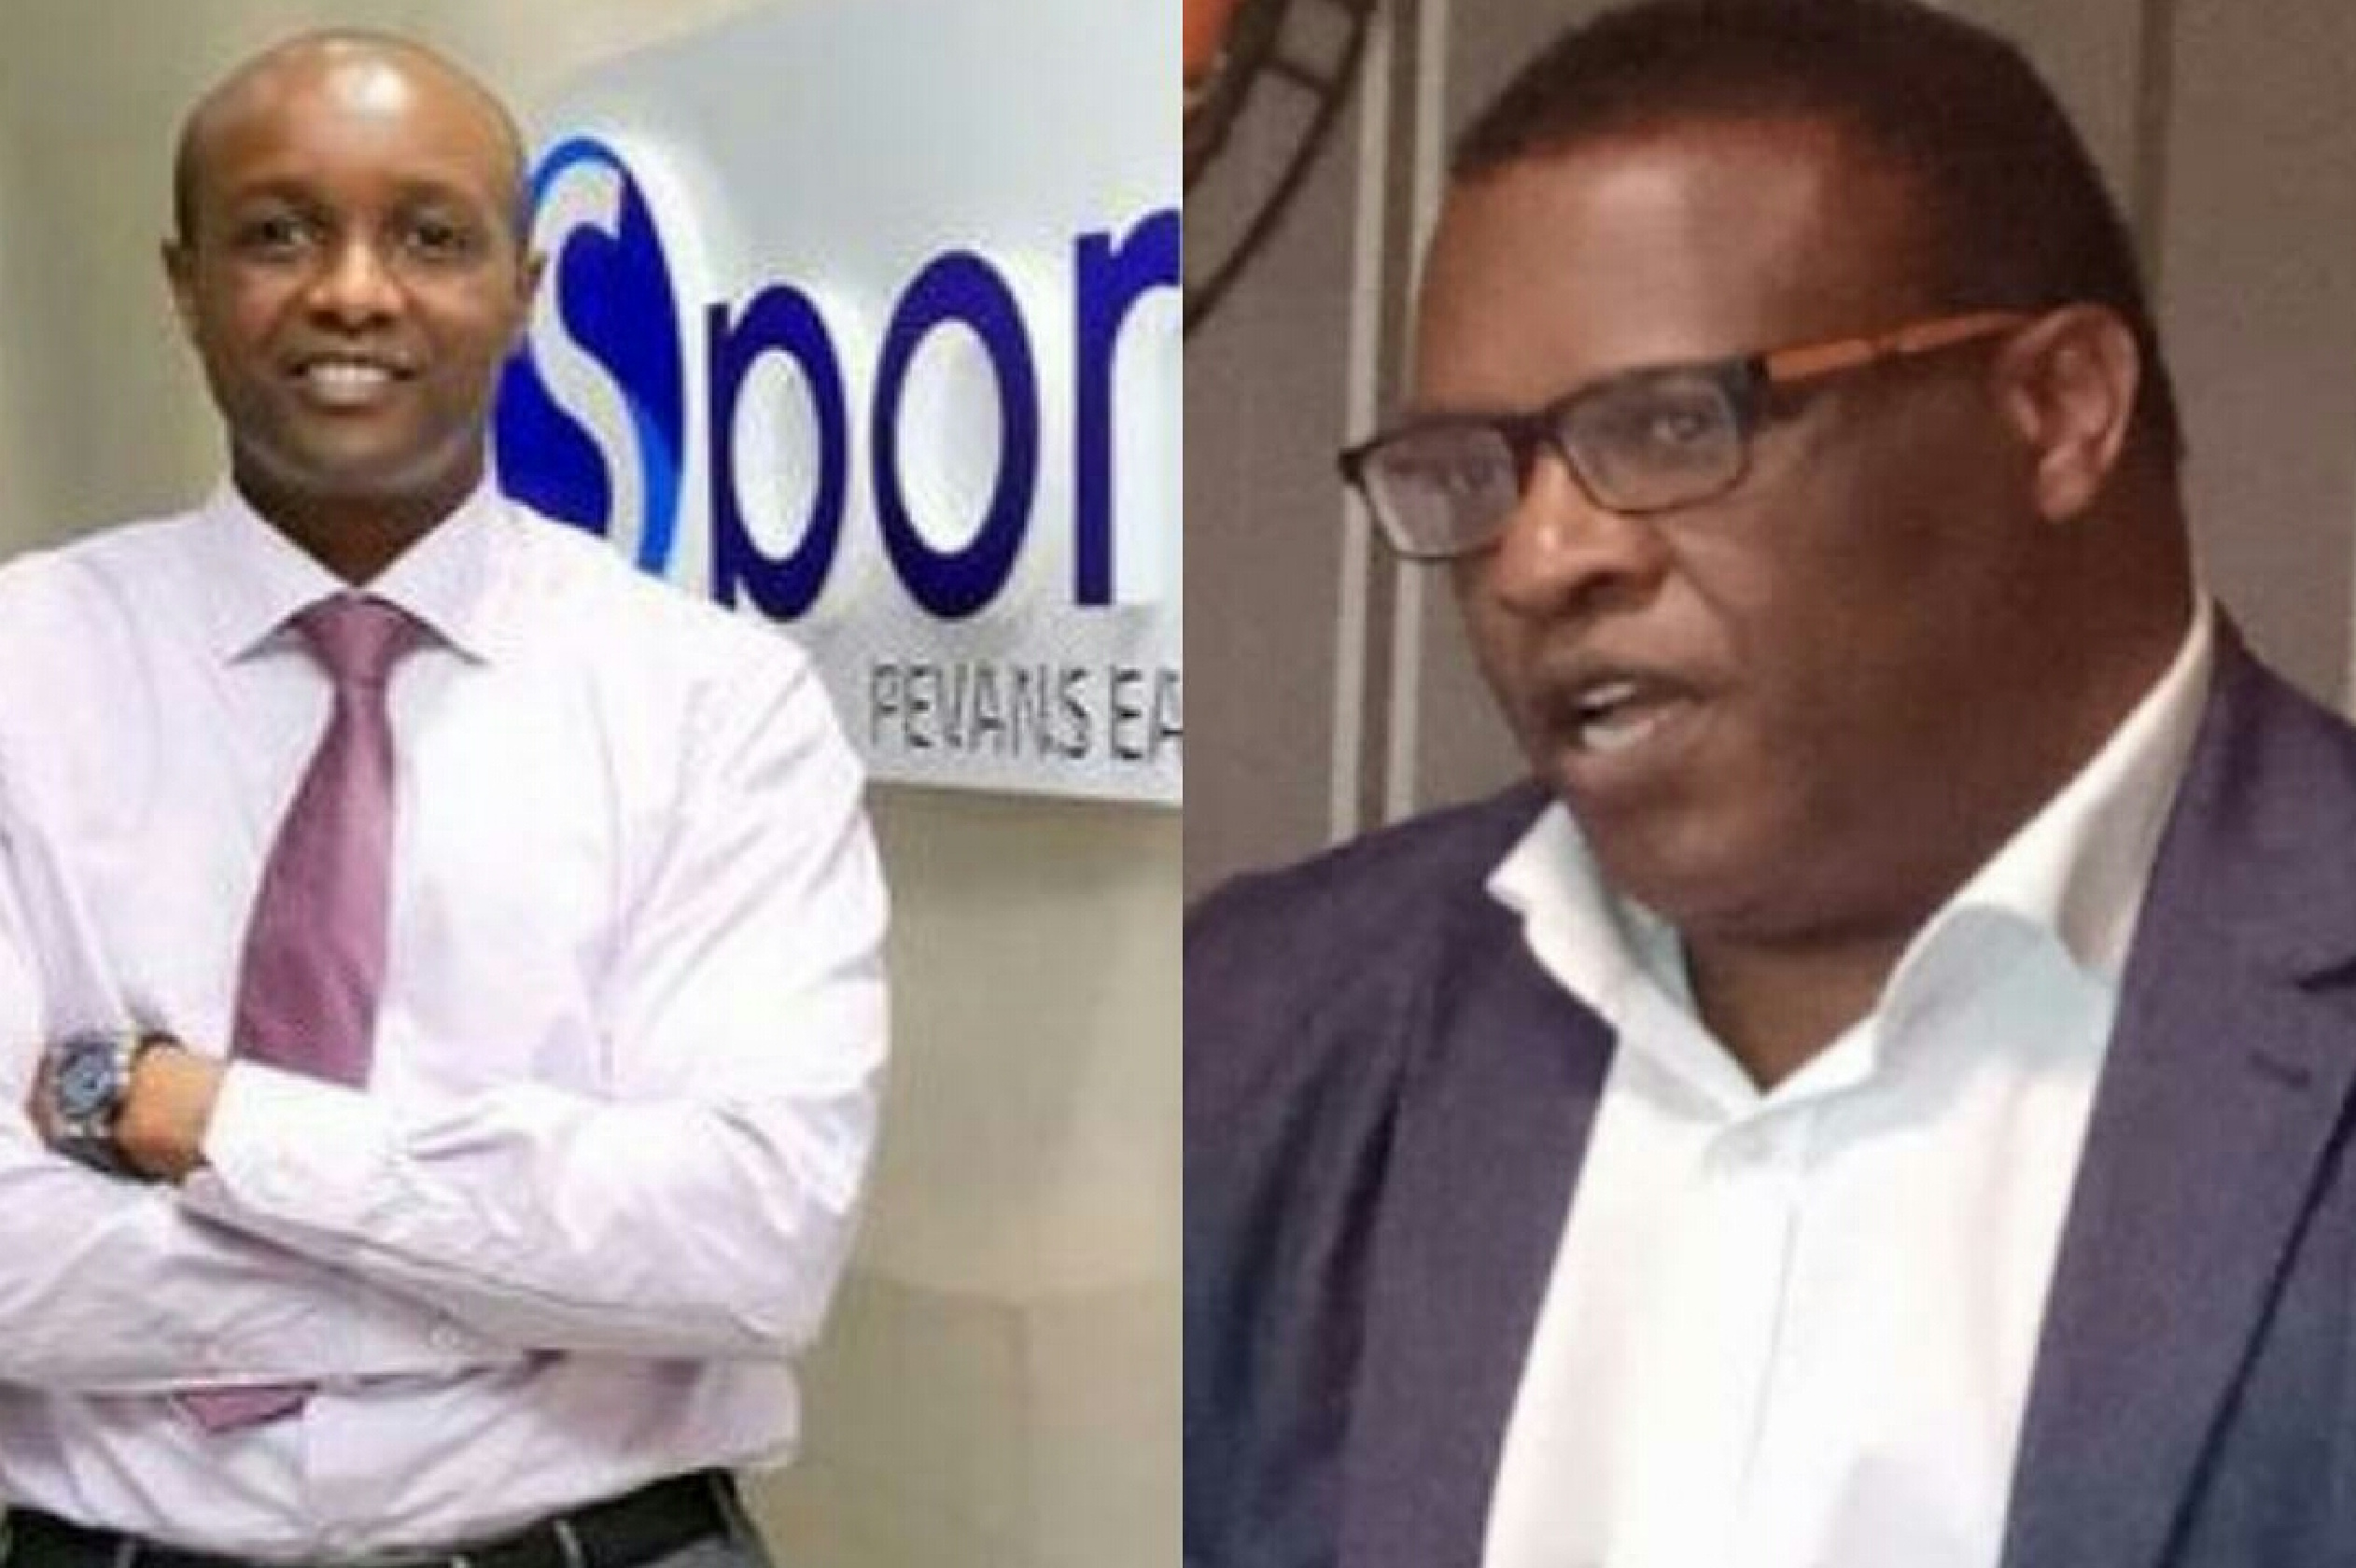 SPORTPESA HOUNDS TWO PARTNERS FOR DERAILING BETTING.